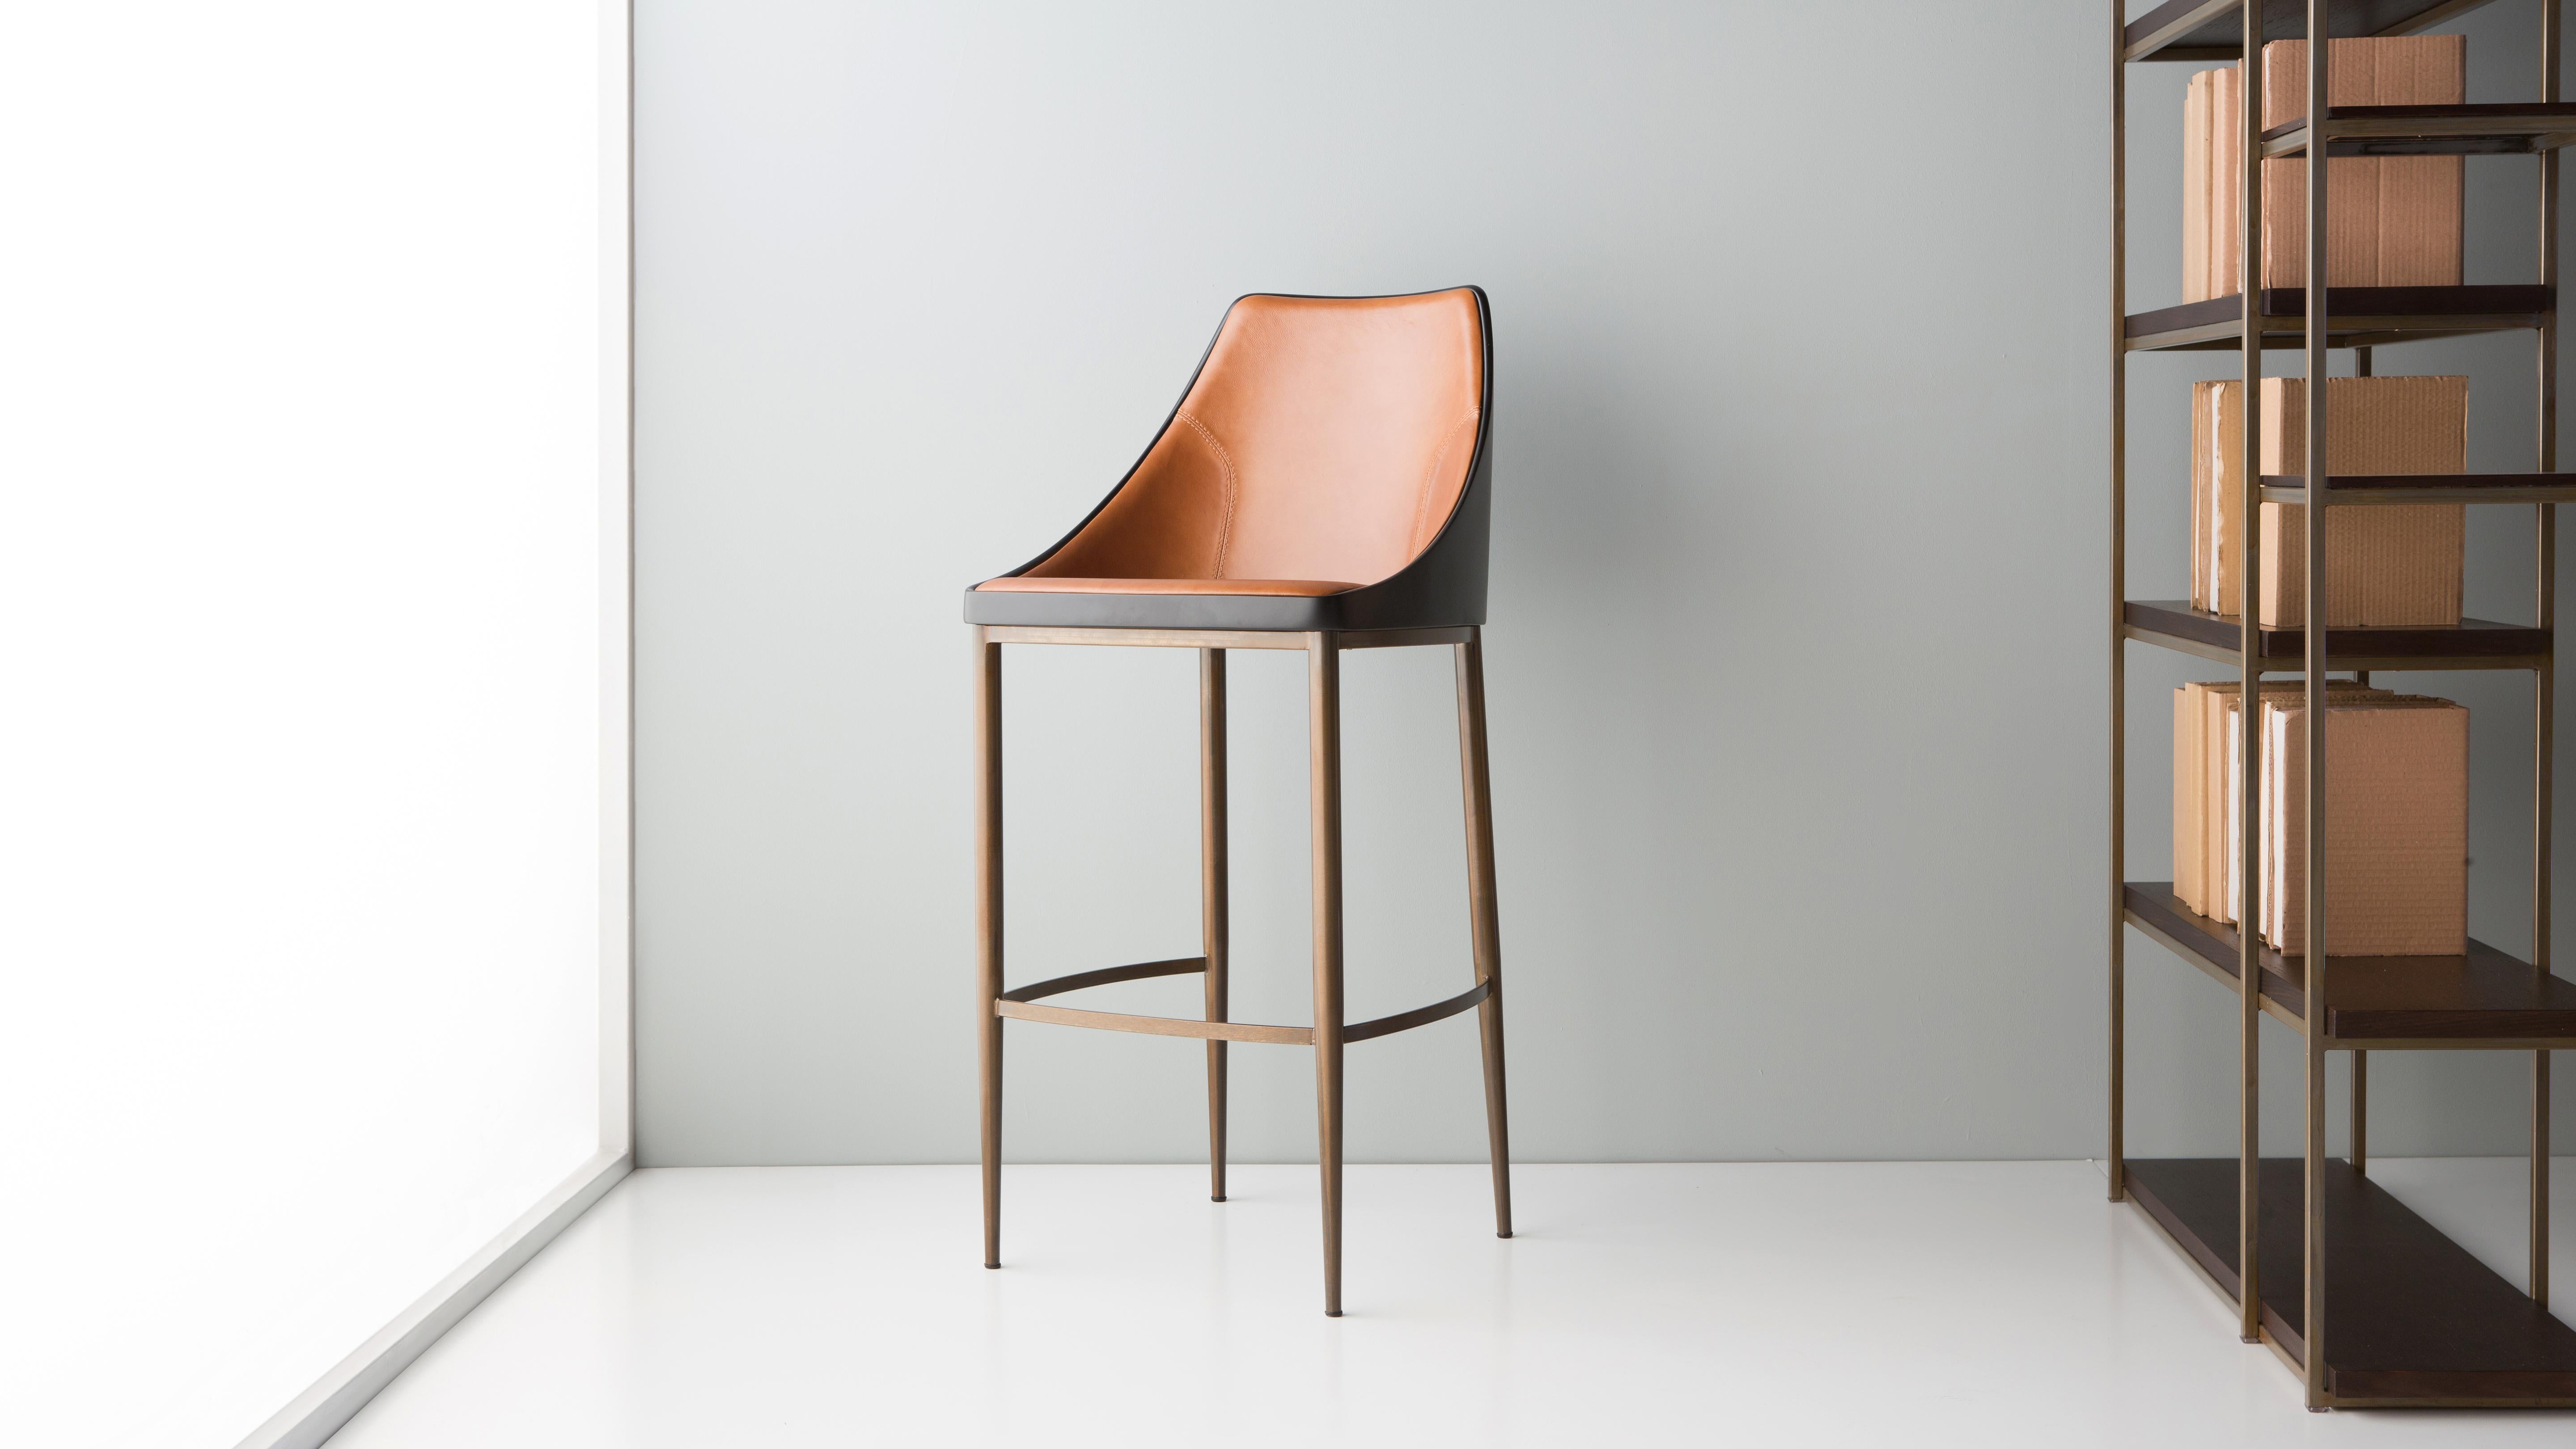 High Bloo Bar Stool by Doimo Brasil
Dimensions: W 50 x D 53 x H 107 cm 
Materials: Veneer, Natural Leather.

Also available in W 50 x D 53 x H 91 cm, Seat Height: 60 cm. 

With the intention of providing good taste and personality, Doimo deciphers